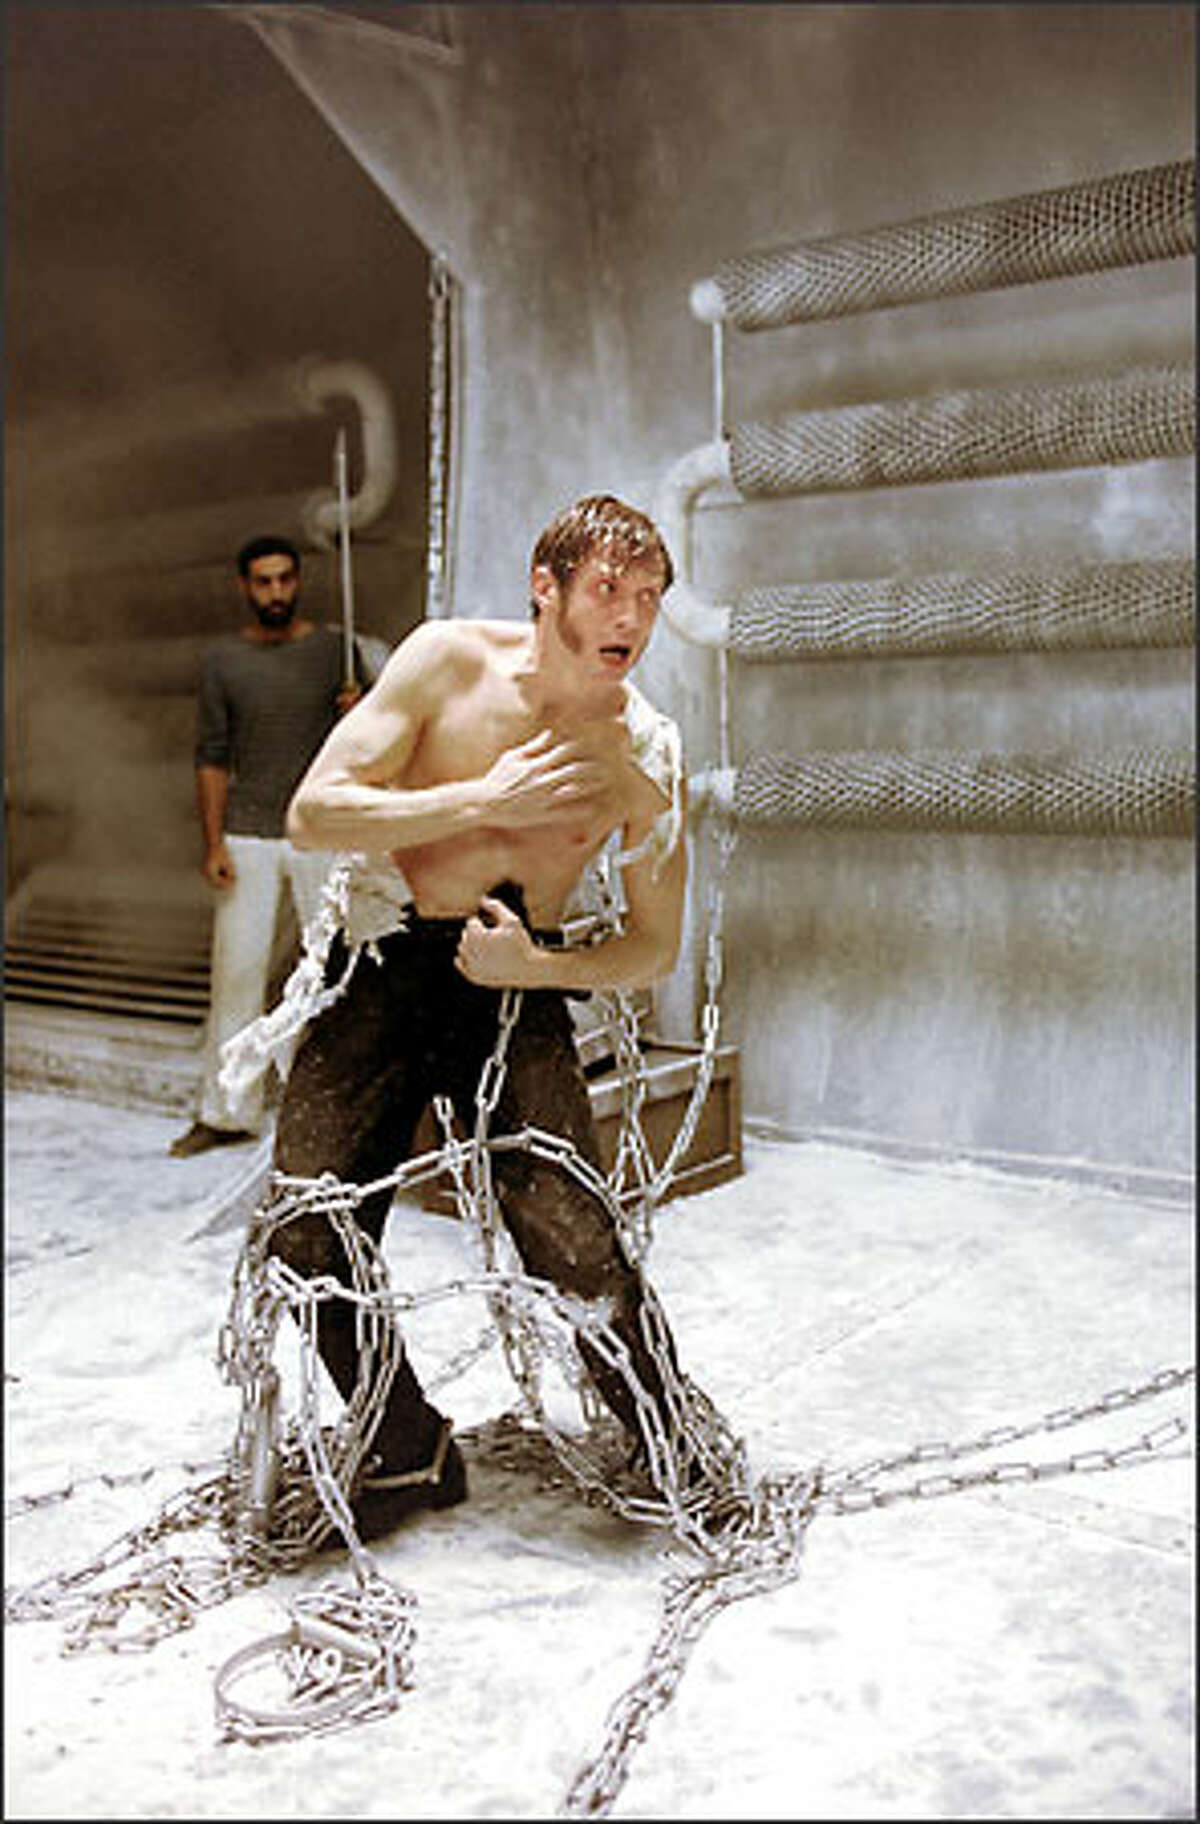 A securely restrained Dr. Jekyll (Jason Flemyng) begins the shocking transformation into the monstrous Mr. Hyde. A number of special-effects techniques were used for Hyde -- including CGI effects, models, midget actors and a massive prosthetic suit worn by Flemying. Author Robert Louis Stevenson created the dual character(s) in 1886.